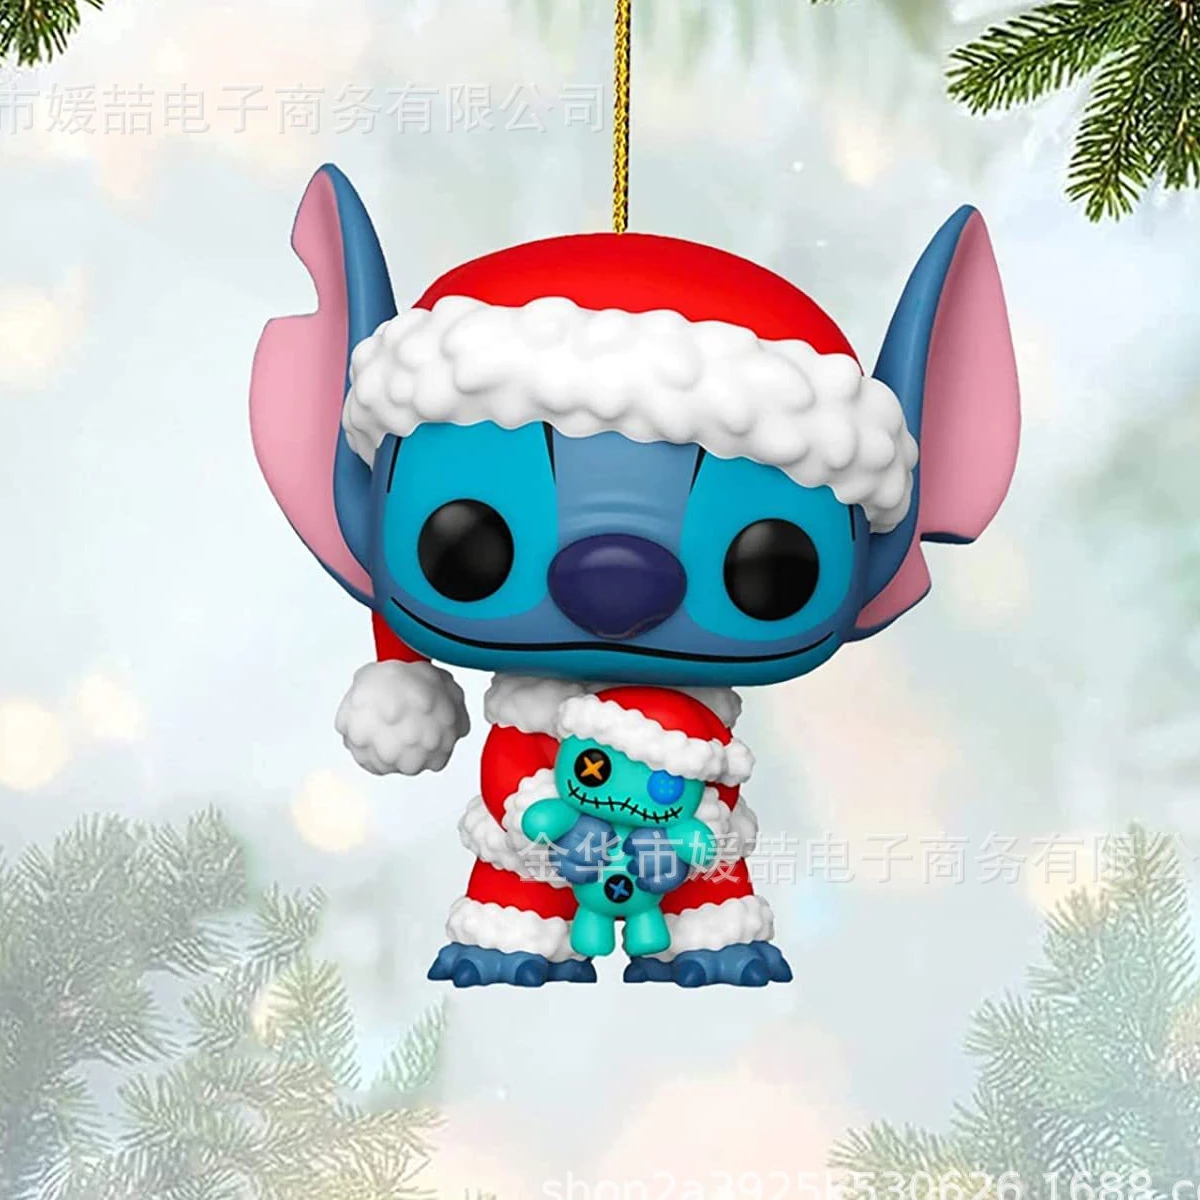 https://ae01.alicdn.com/kf/S06d4913864204723a21dd28e3672f4e6y/Kawaii-Stitch-Action-Figure-Toys-Hanging-Decorations-for-Christmas-Tree-Toppers-Pendant-Hanging-Ornament-Party-Decora.jpg